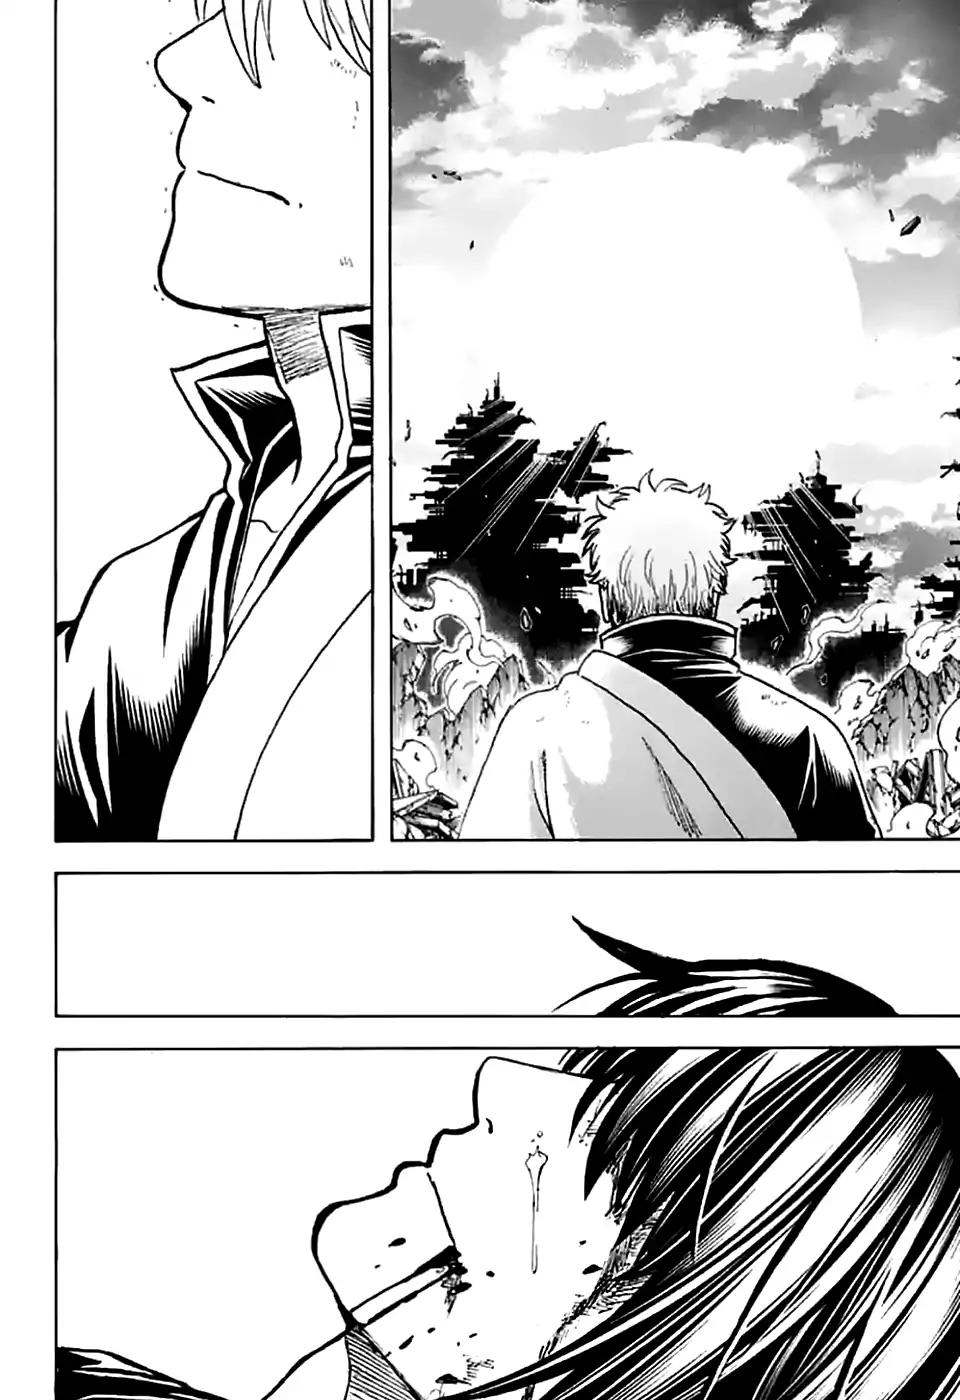 Gintama chapter 703 page 41